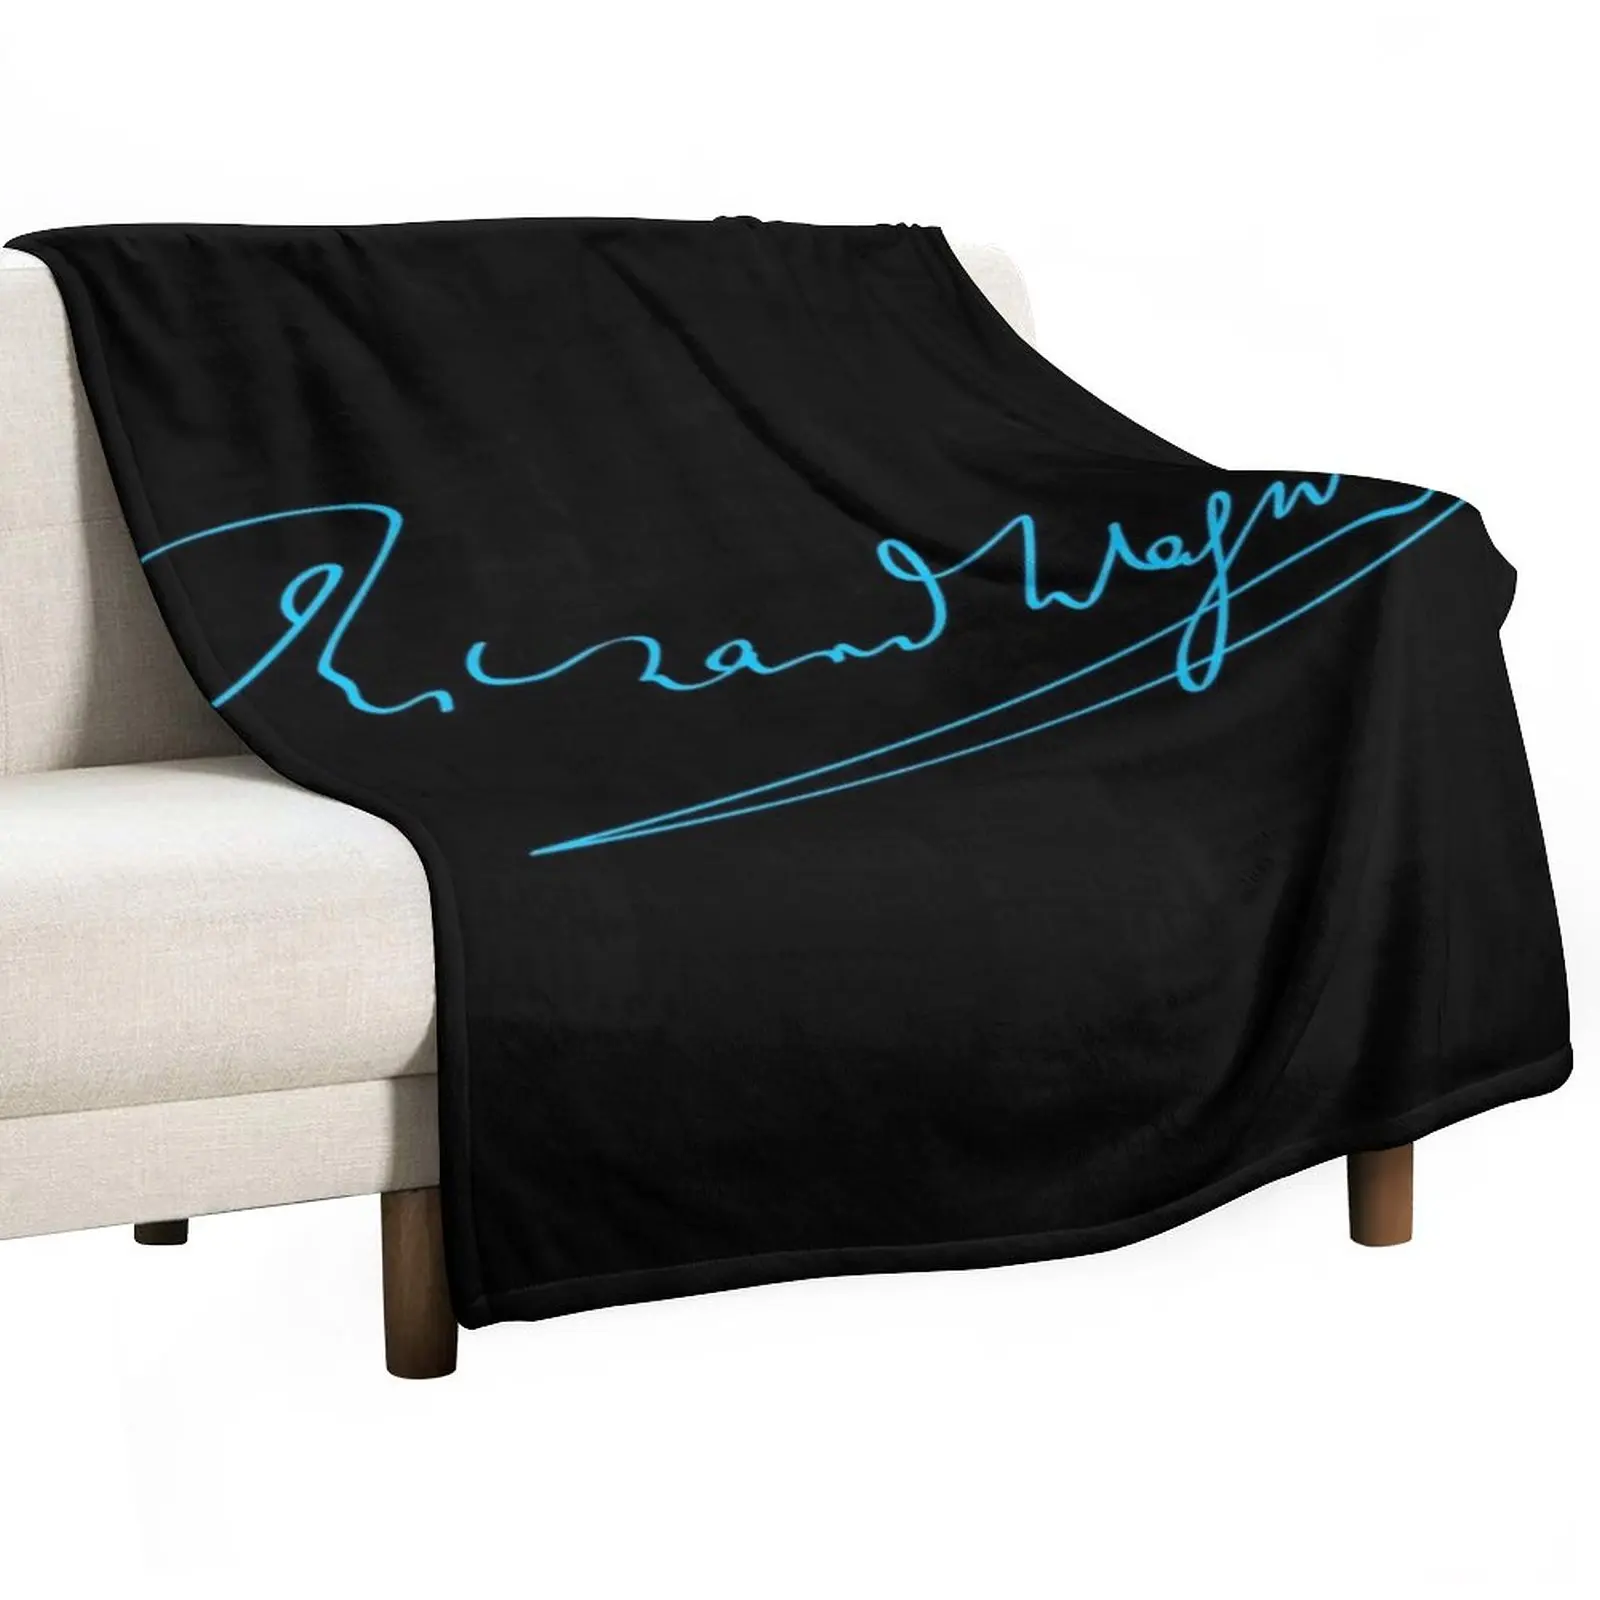 

Richard Wagner - Signature - Blue - RB Throw Blanket For Baby Blankets Sofas Of Decoration Sofa Throw Stuffeds Blankets